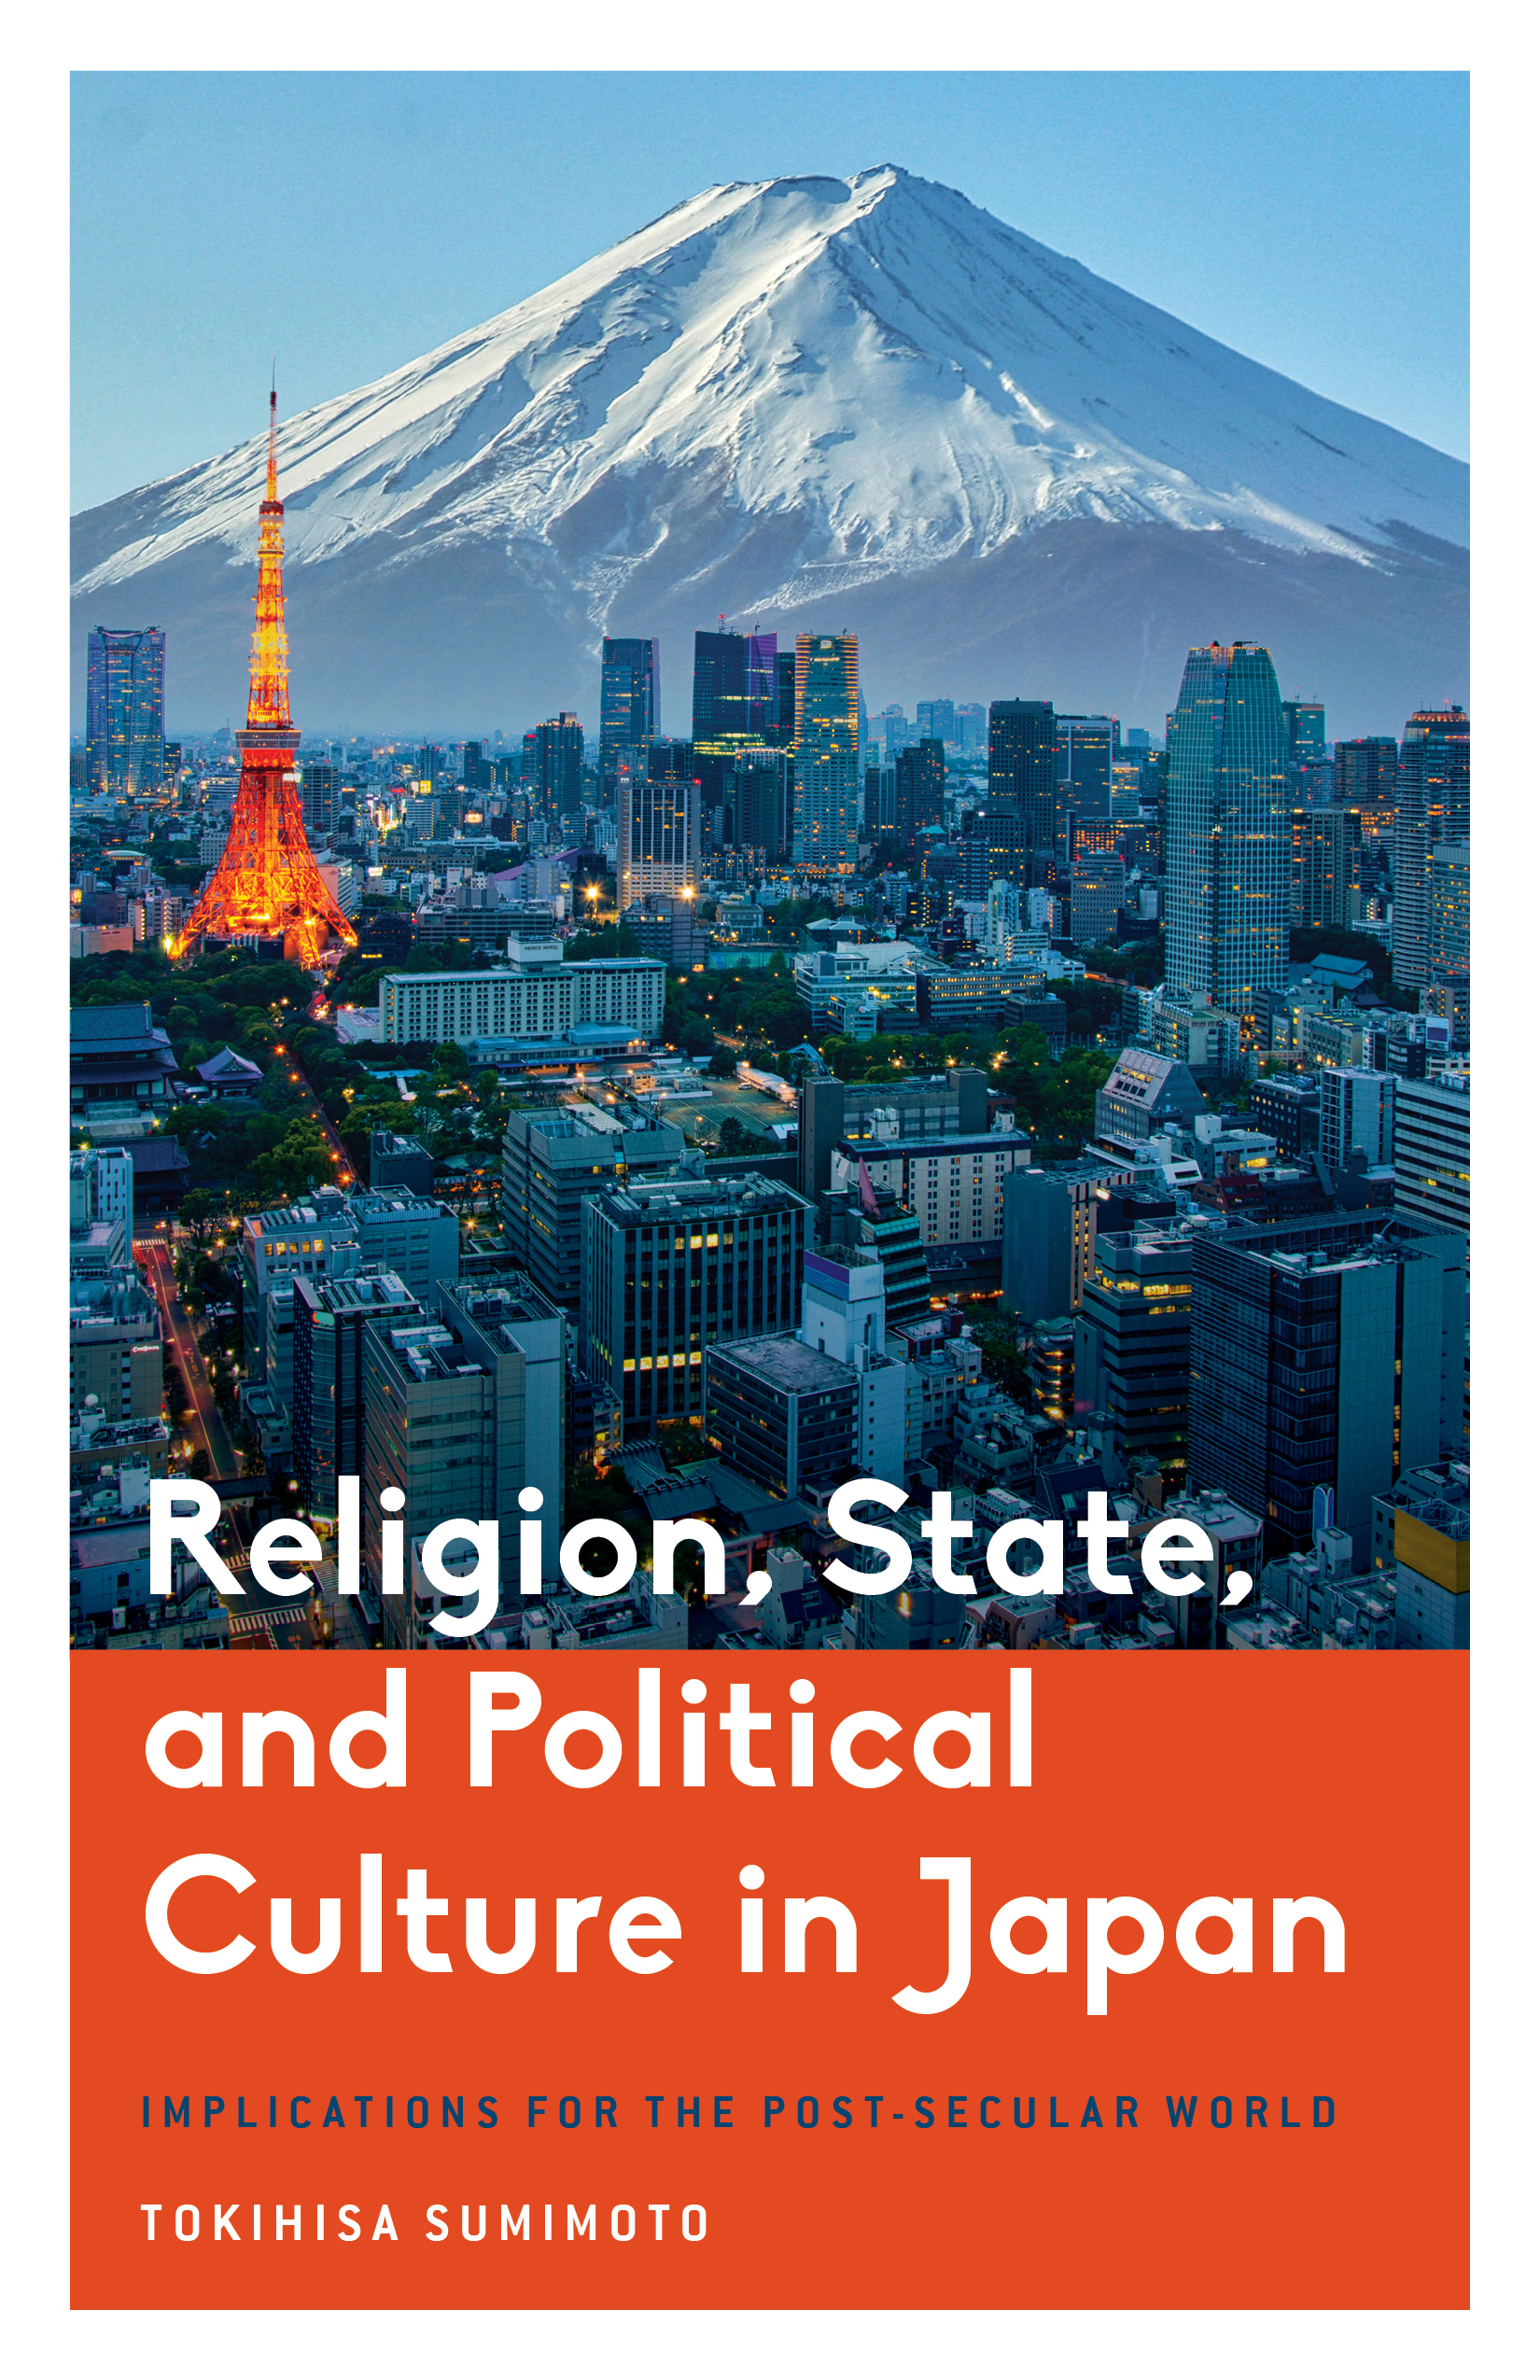 Religion, State, and Political Culture in Japan: Implications for the Post-Secular World